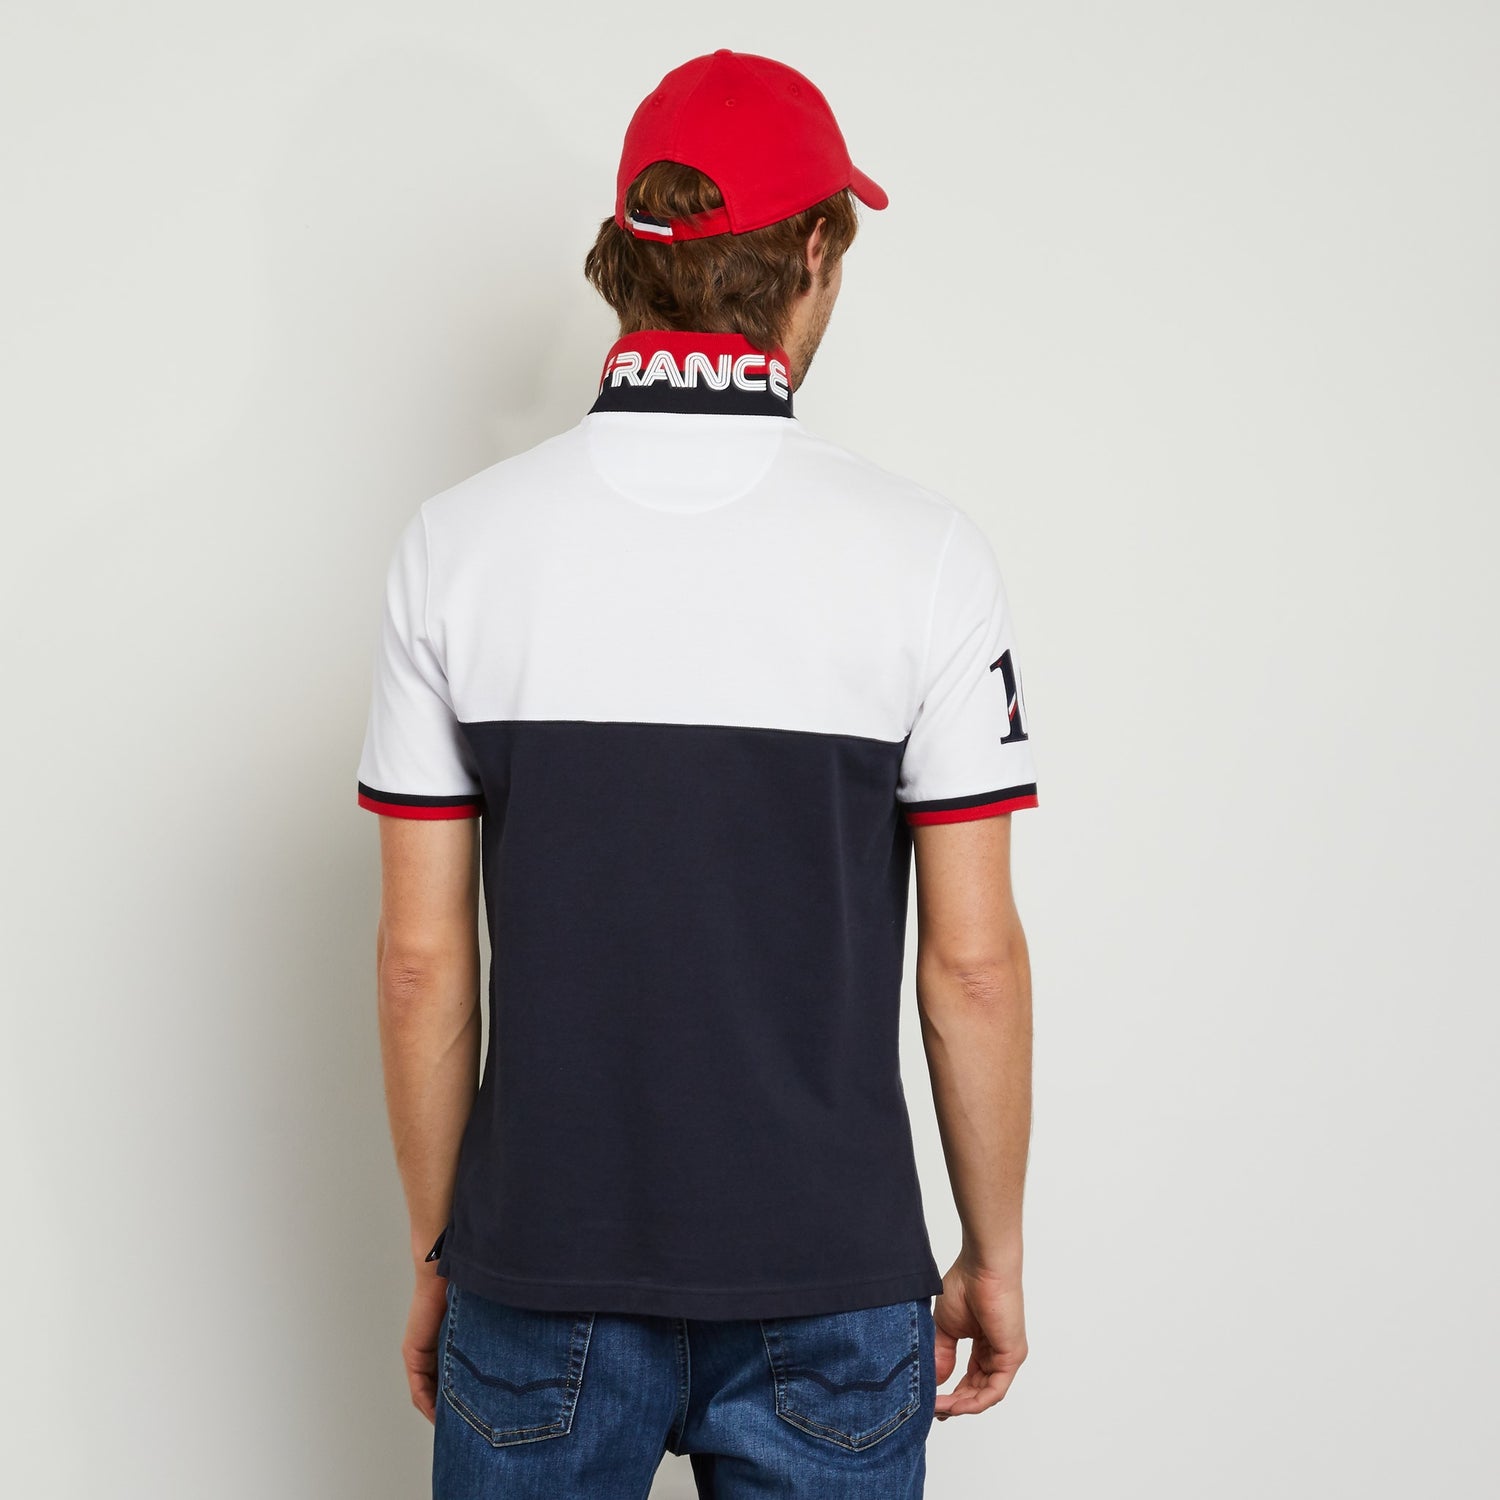 White Colour-Block Polo With No. 10 Embroidery